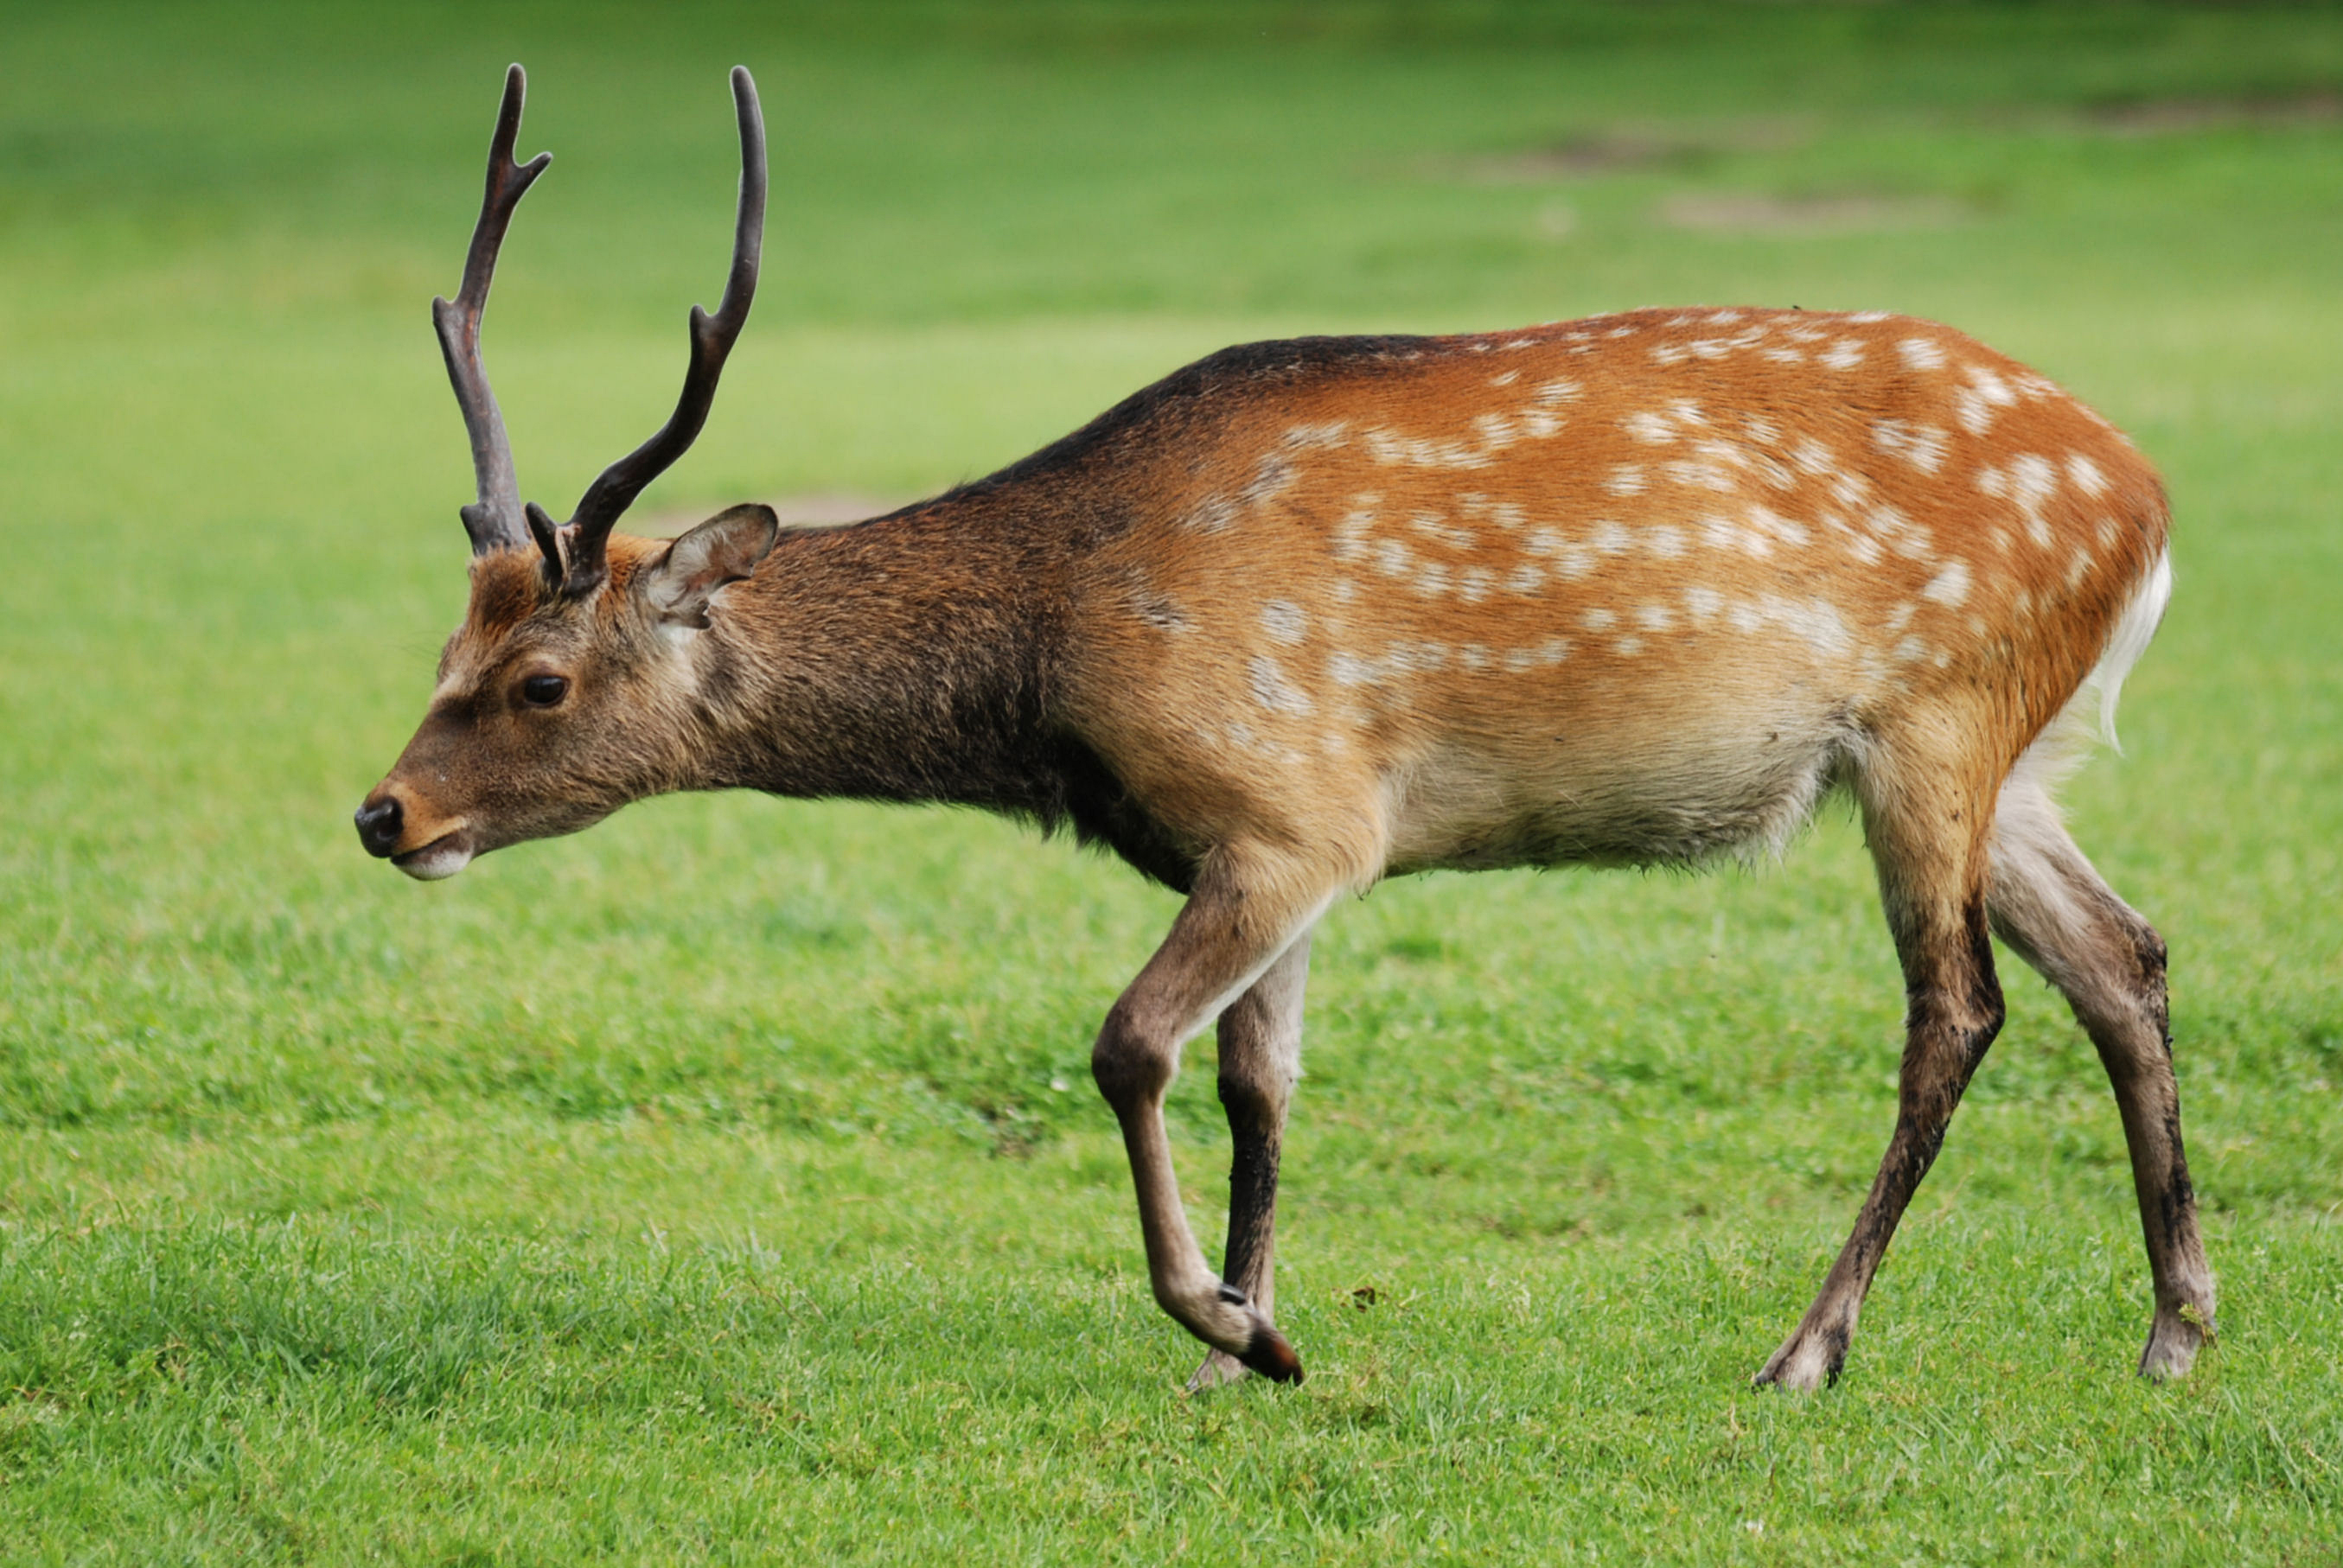 Where can I find sika deer?